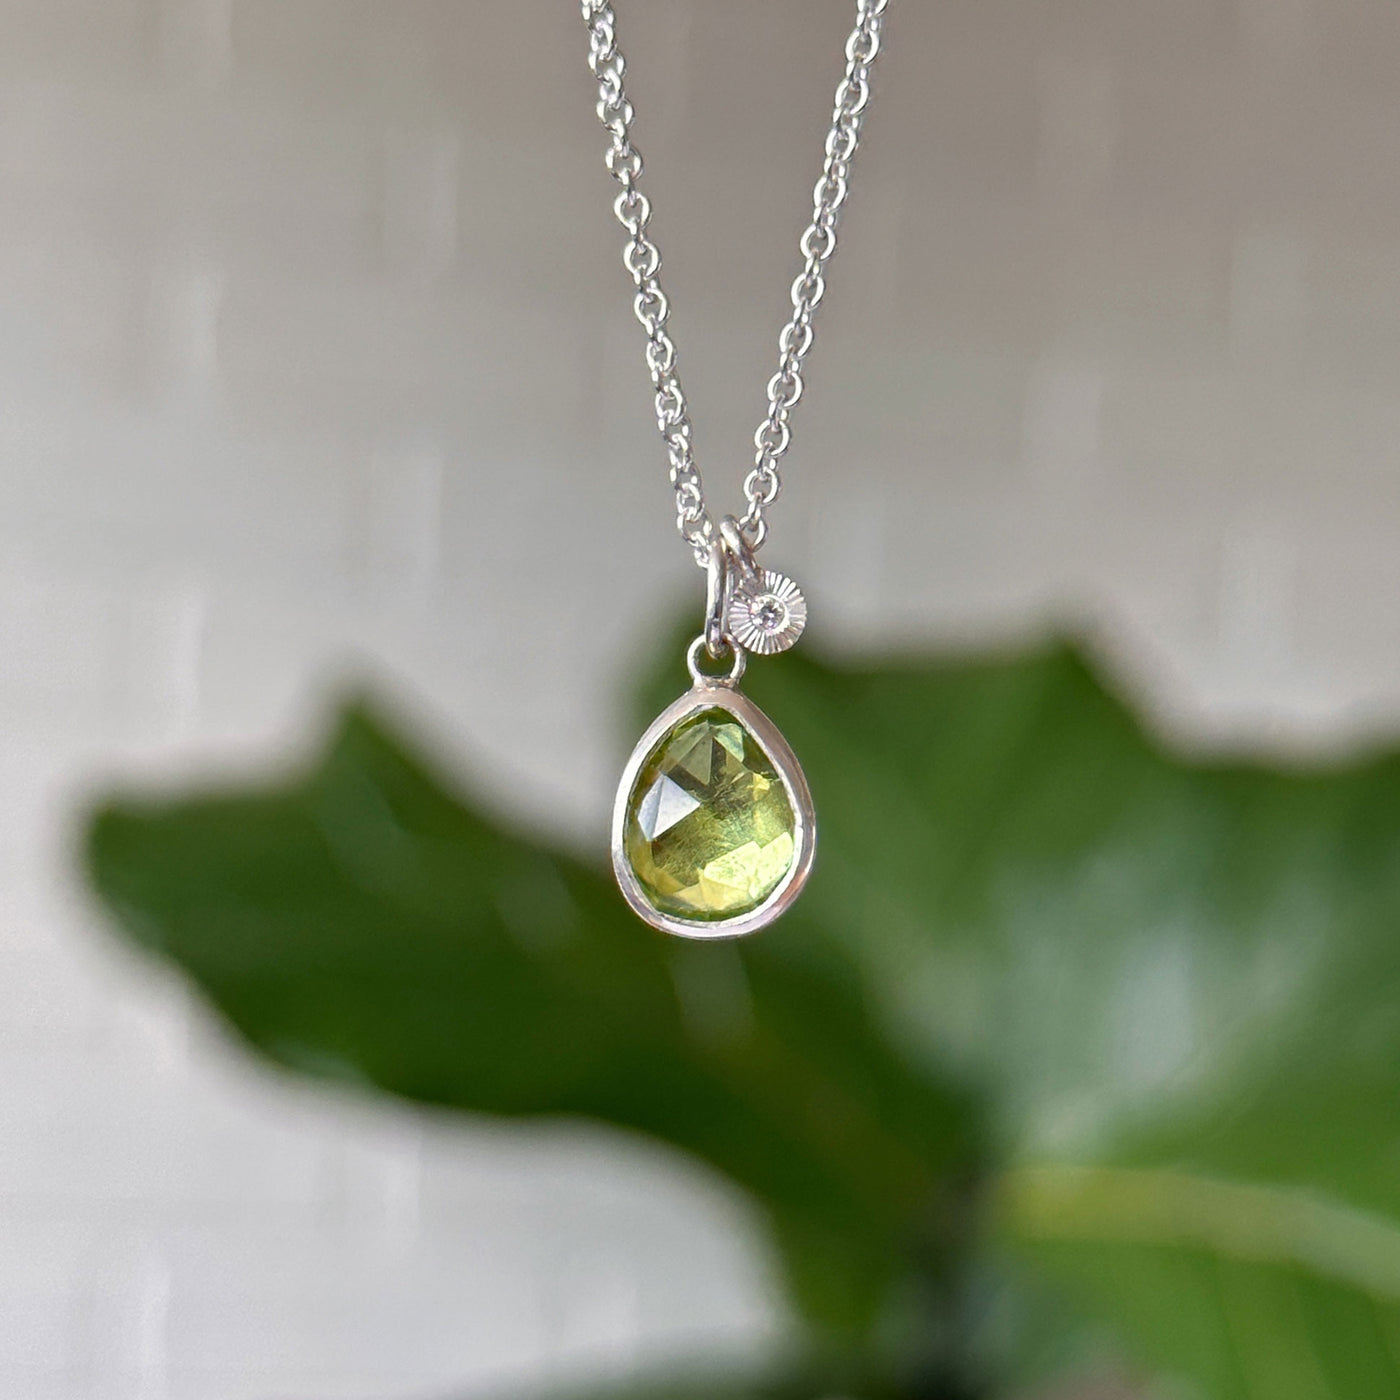 Peridot Theia Necklace in Sterling Silver #2 hanging in front of white wall, front angle